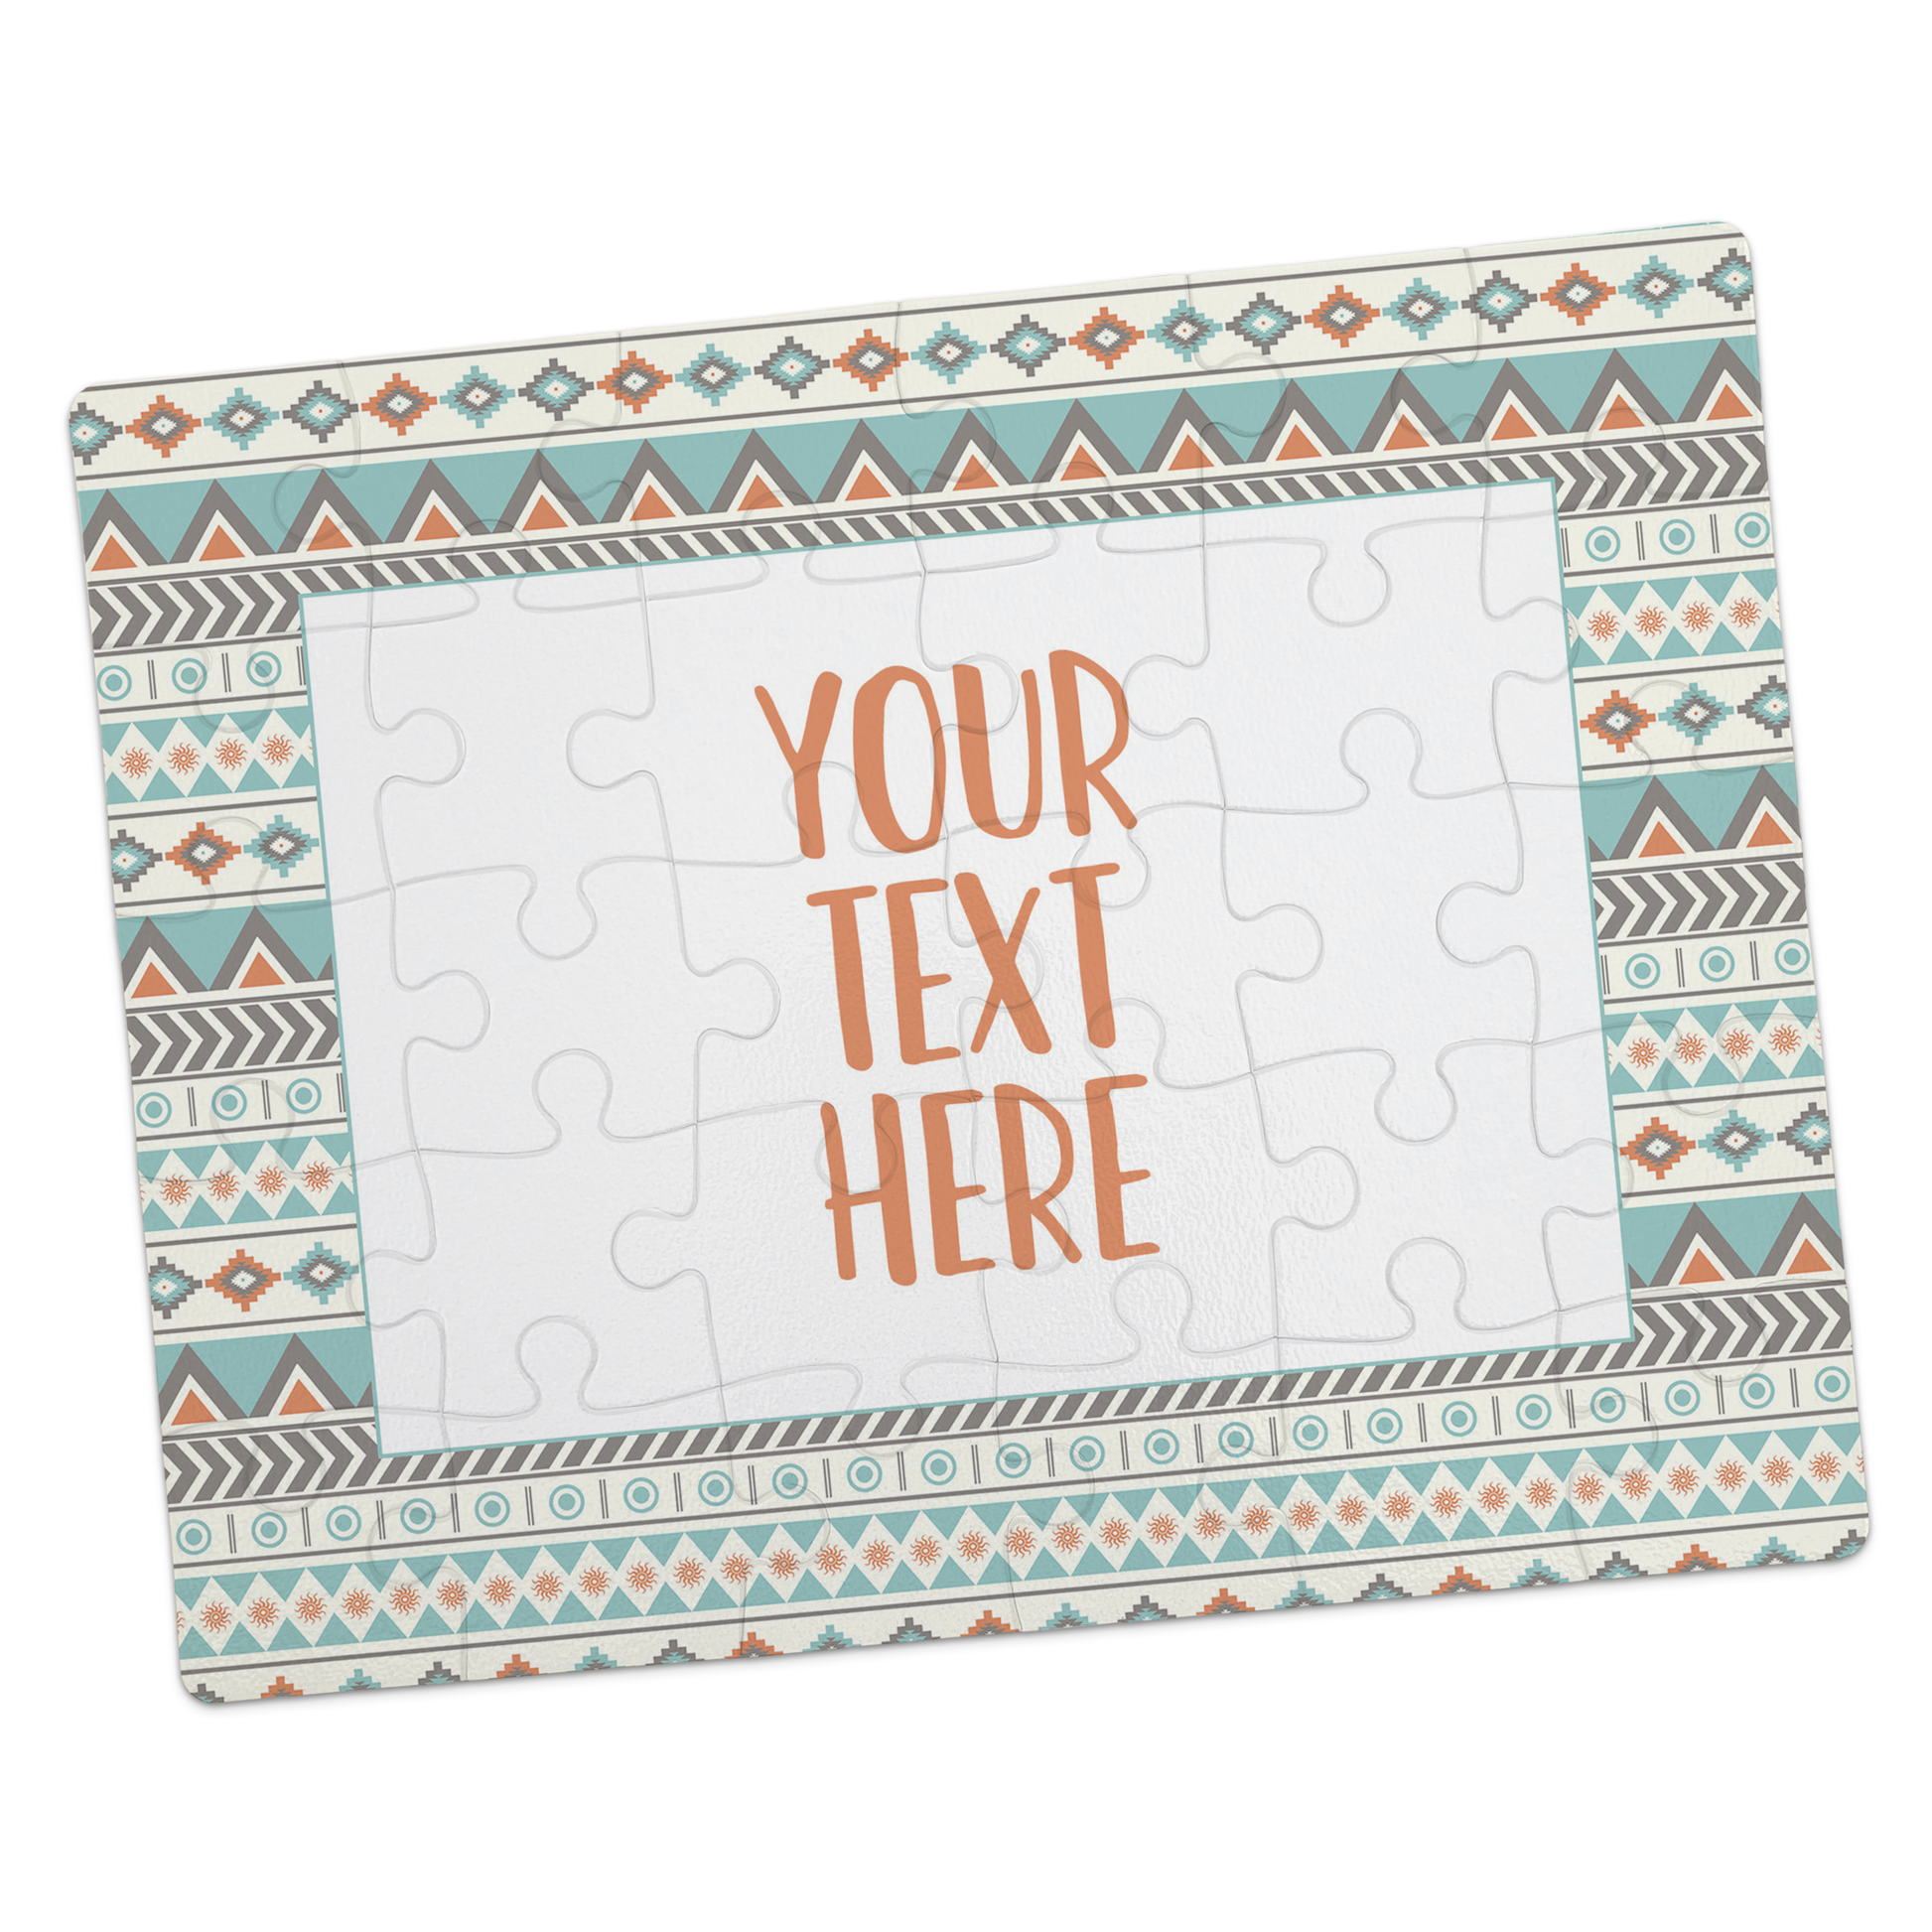 Create Your Own Puzzle - Tribal Design - CYOP0246 | S'Berry Boutique